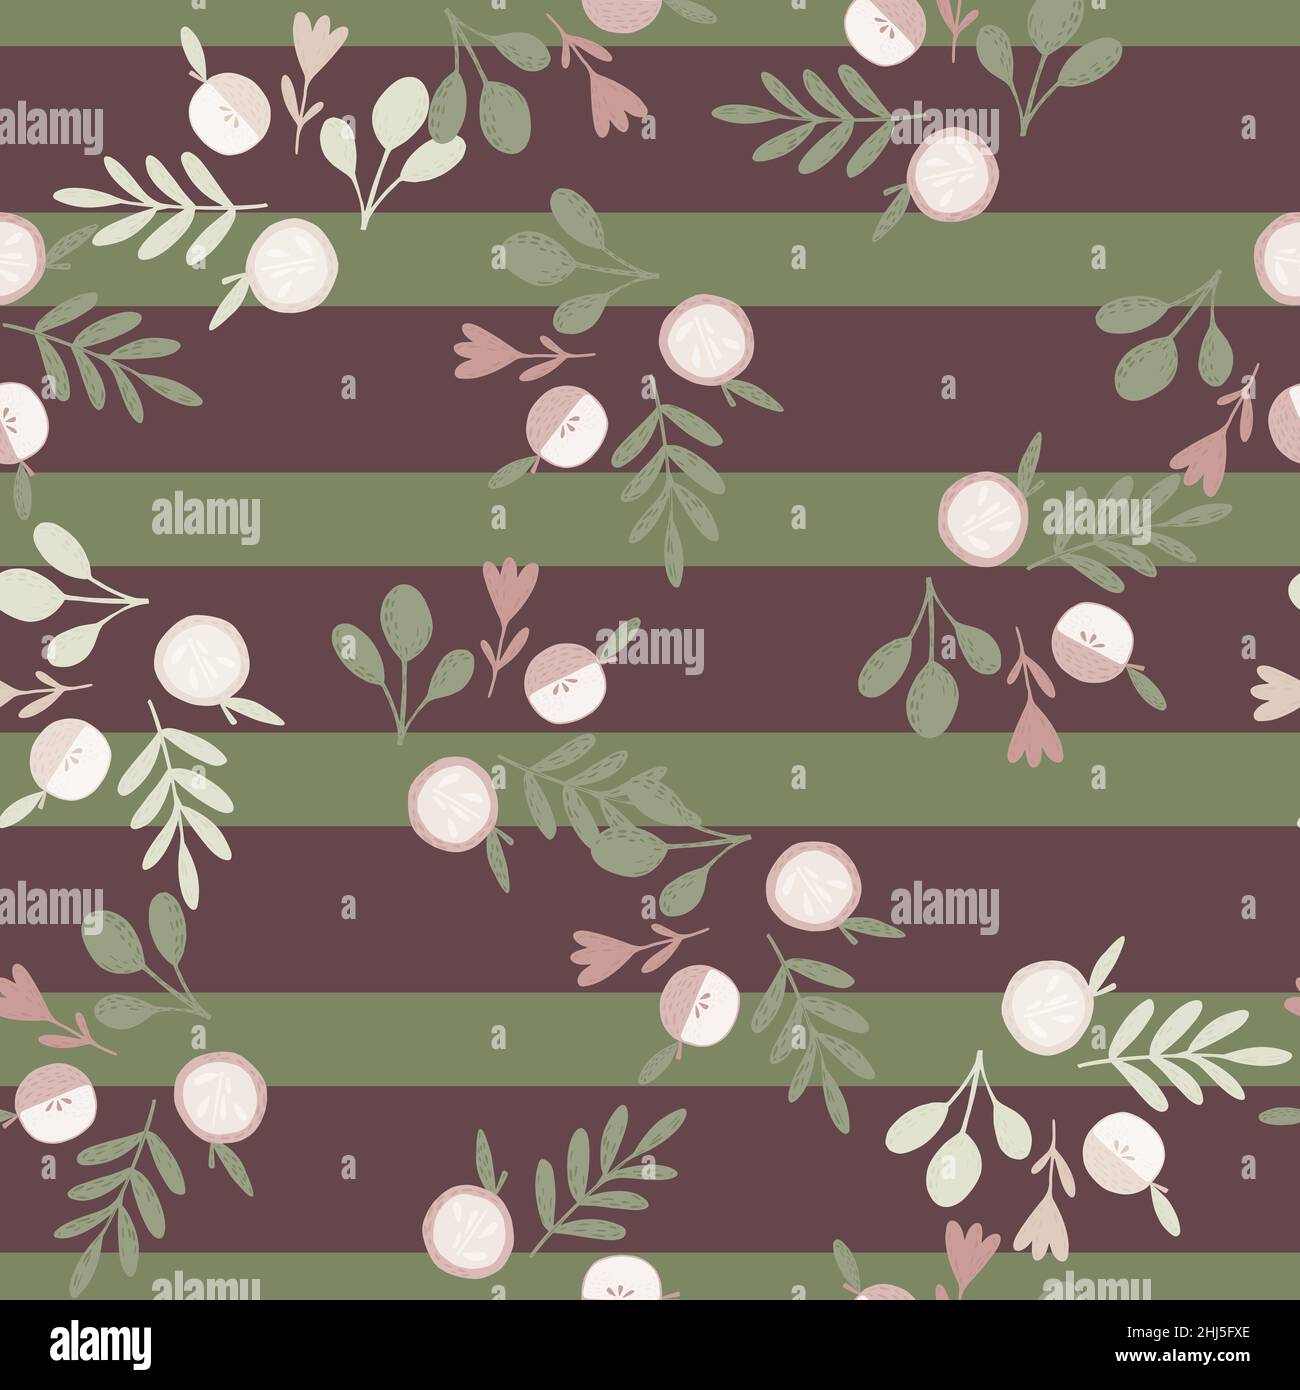 Seamless random pattern with white apples and leaves print. Green and purple striped background. Graphic design for wrapping paper and fabric textures Stock Vector